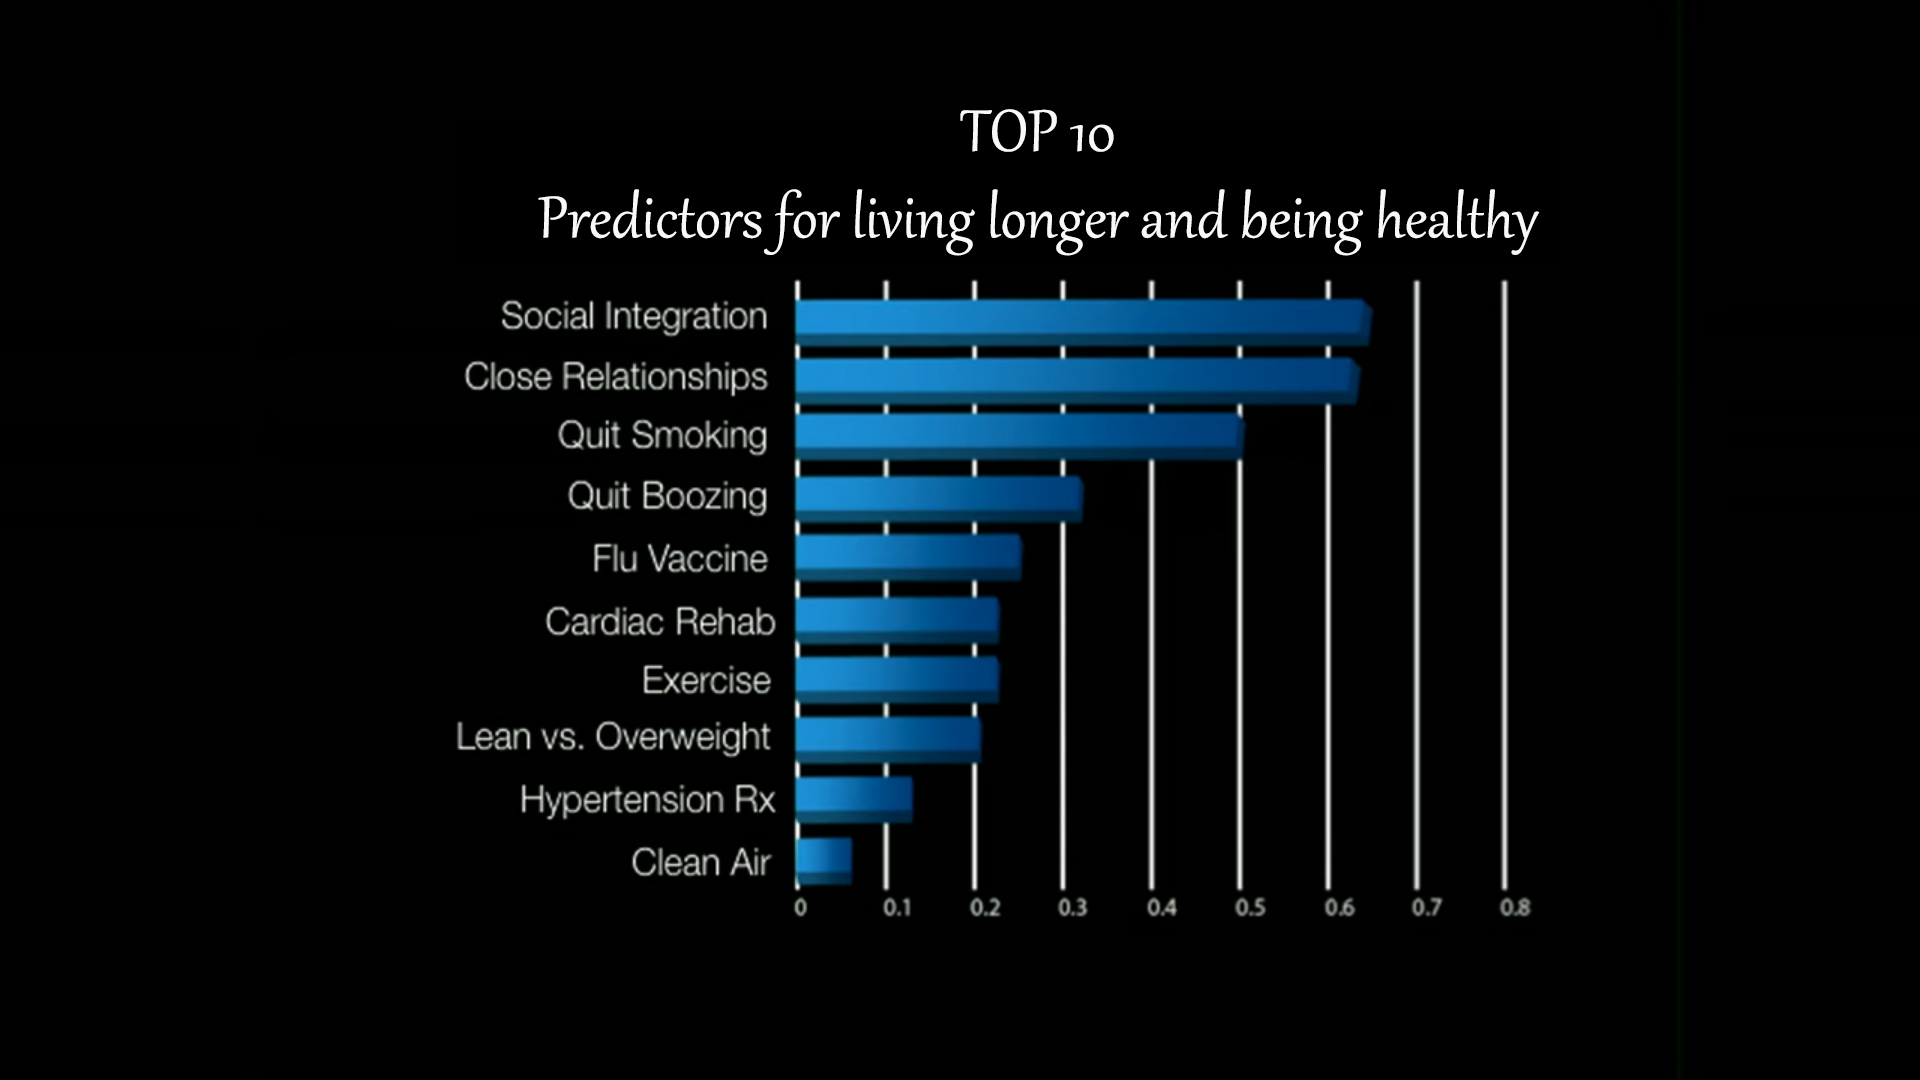 top-10-predictors-for-longer-life-and-health